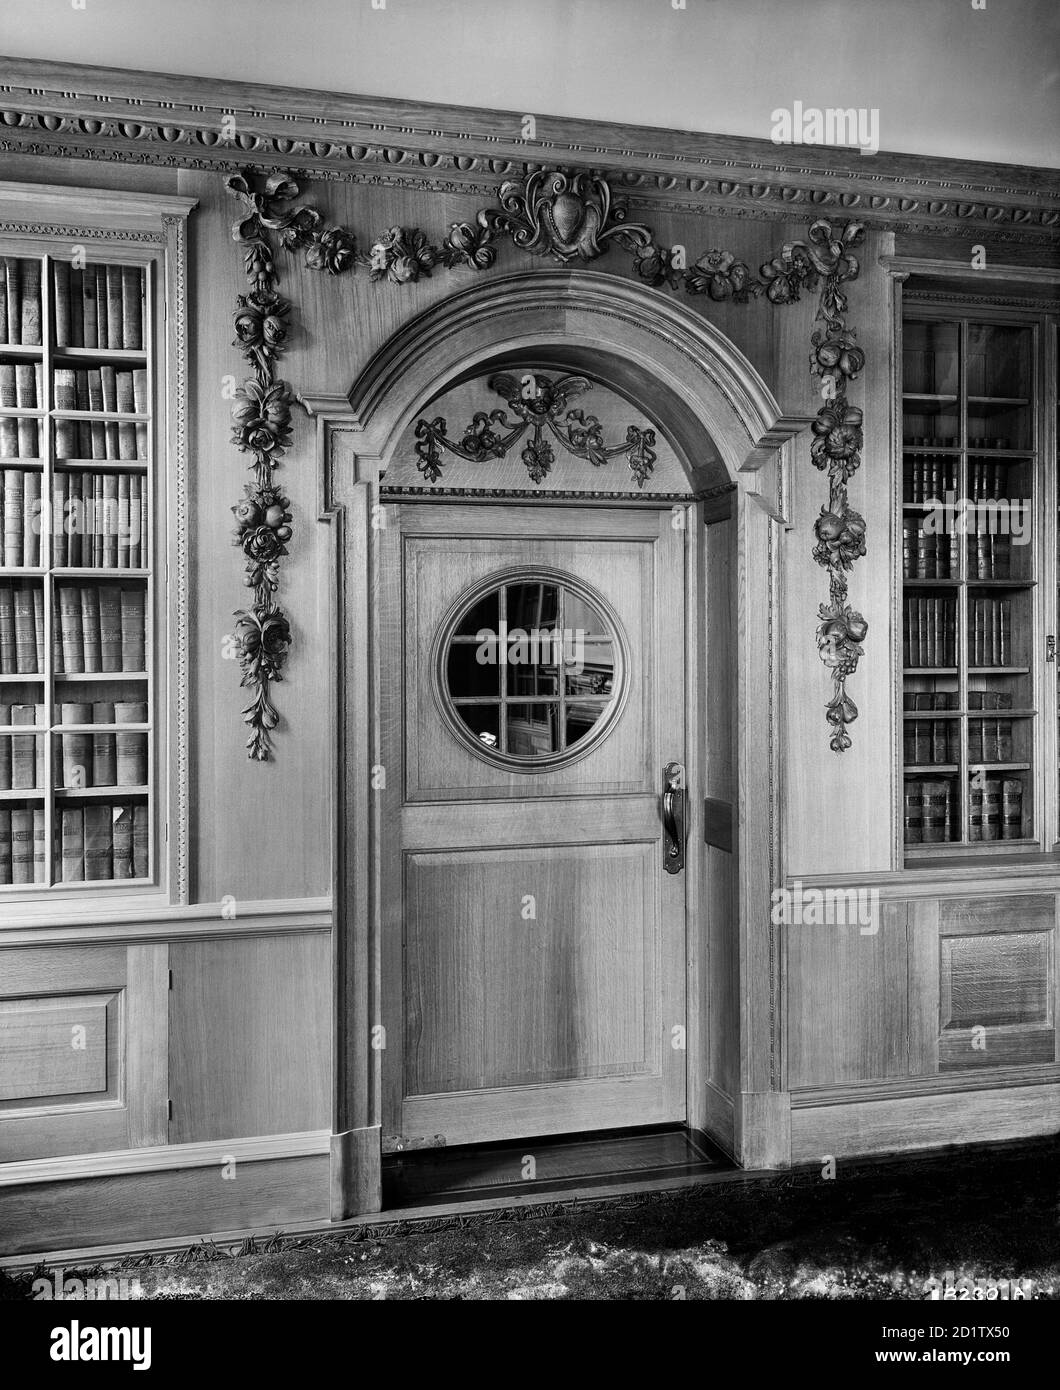 SESSIONS HOUSE, Lancaster Road, Preston, Lancashire. Interior detail of a doorway in the barristers' library at the County Sessions House. The court house was built between 1900 and 1903 to the designs of Henry Littler, the County architect, in an Edwardian Baroque style. The Bedford Lemere daybook records Goodall, Lamb and Heighway as clients. Photographed by H Bedford Lemere in 1904. Stock Photo